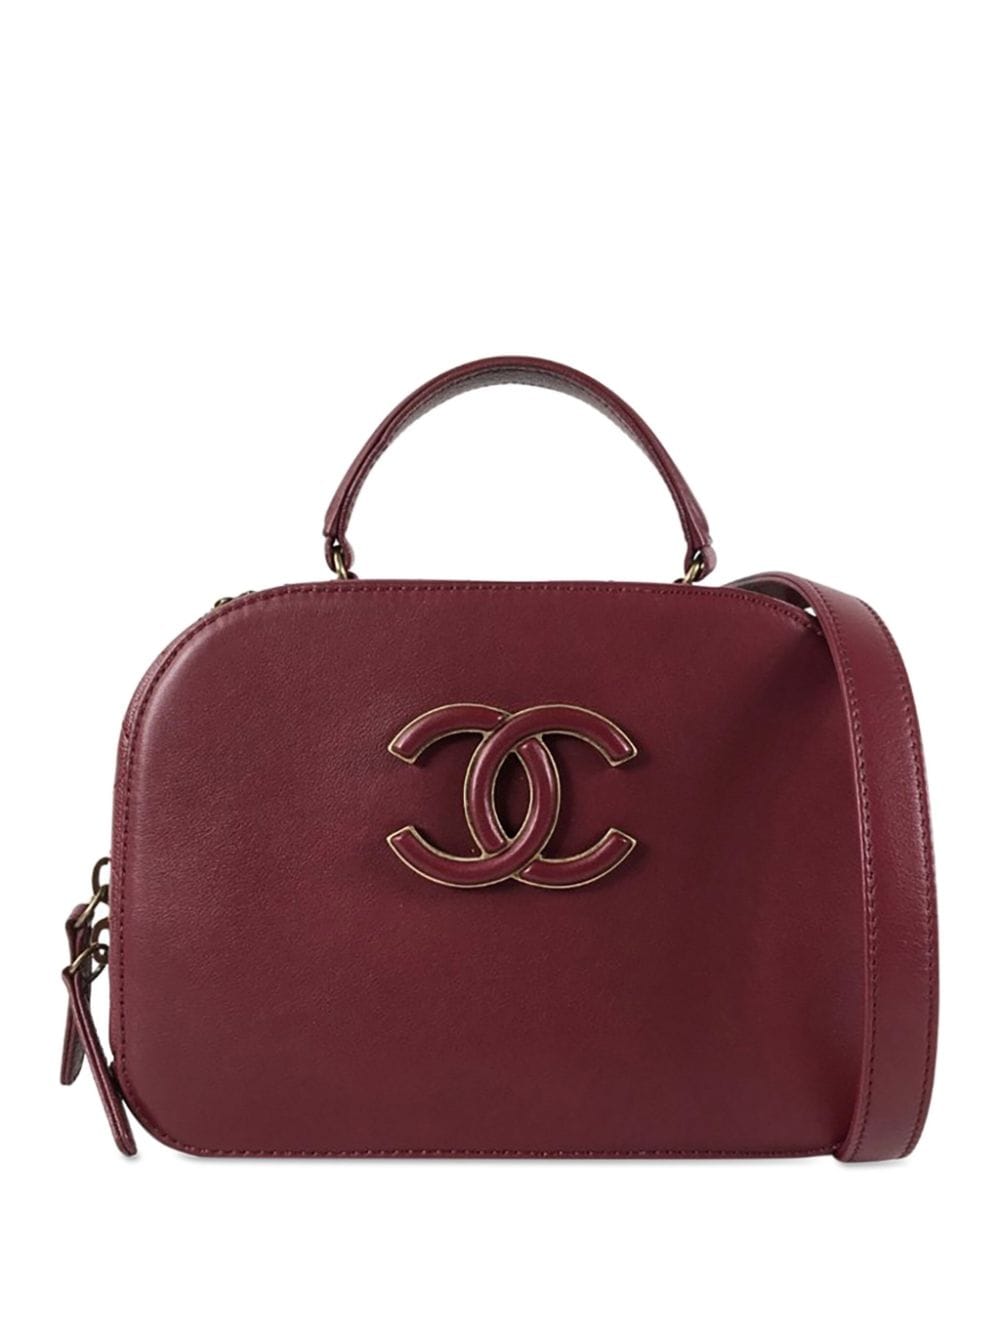 CHANEL Pre-Owned 2017-2018 Coco Curve Vanity Case satchel - Rot von CHANEL Pre-Owned